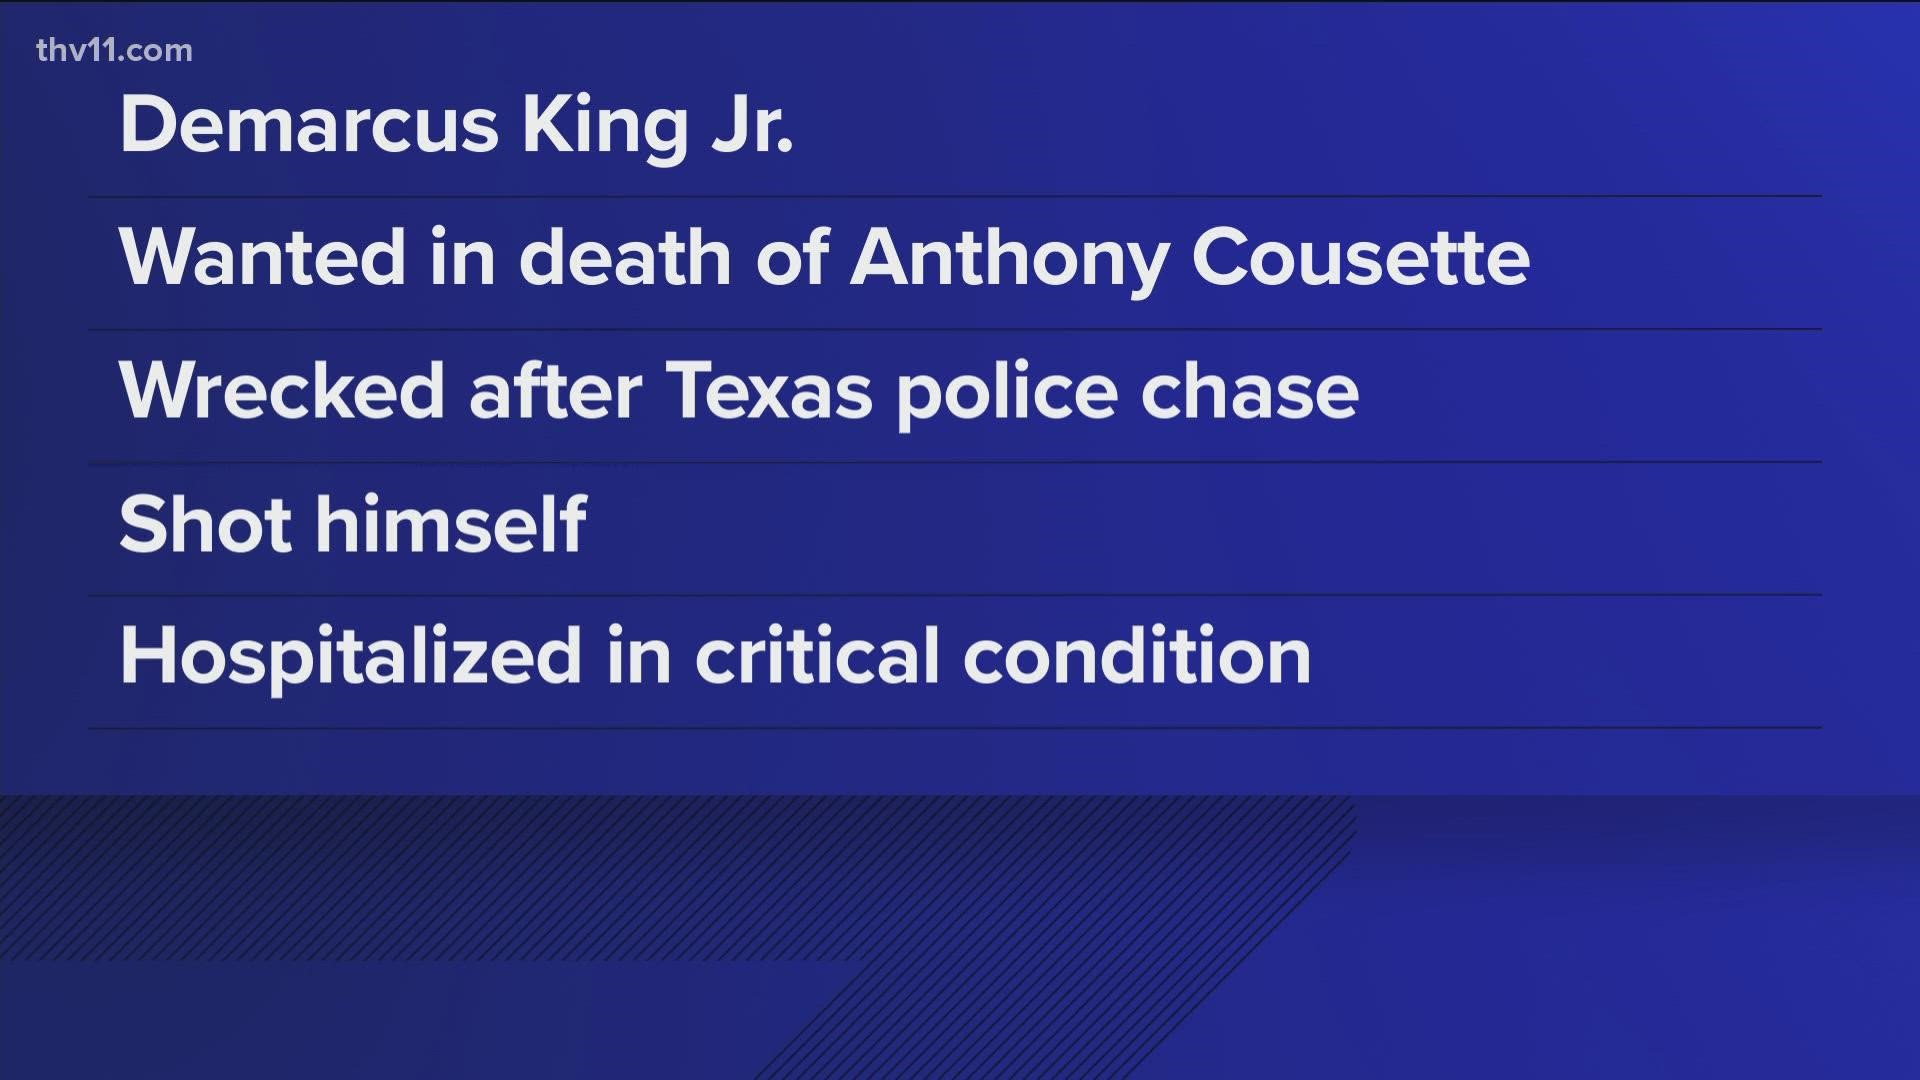 Jacksonville police said that a high speed chase left 18-year-old Demarcus King Jr. in critical condition. King previously had warrants out for capital murder.